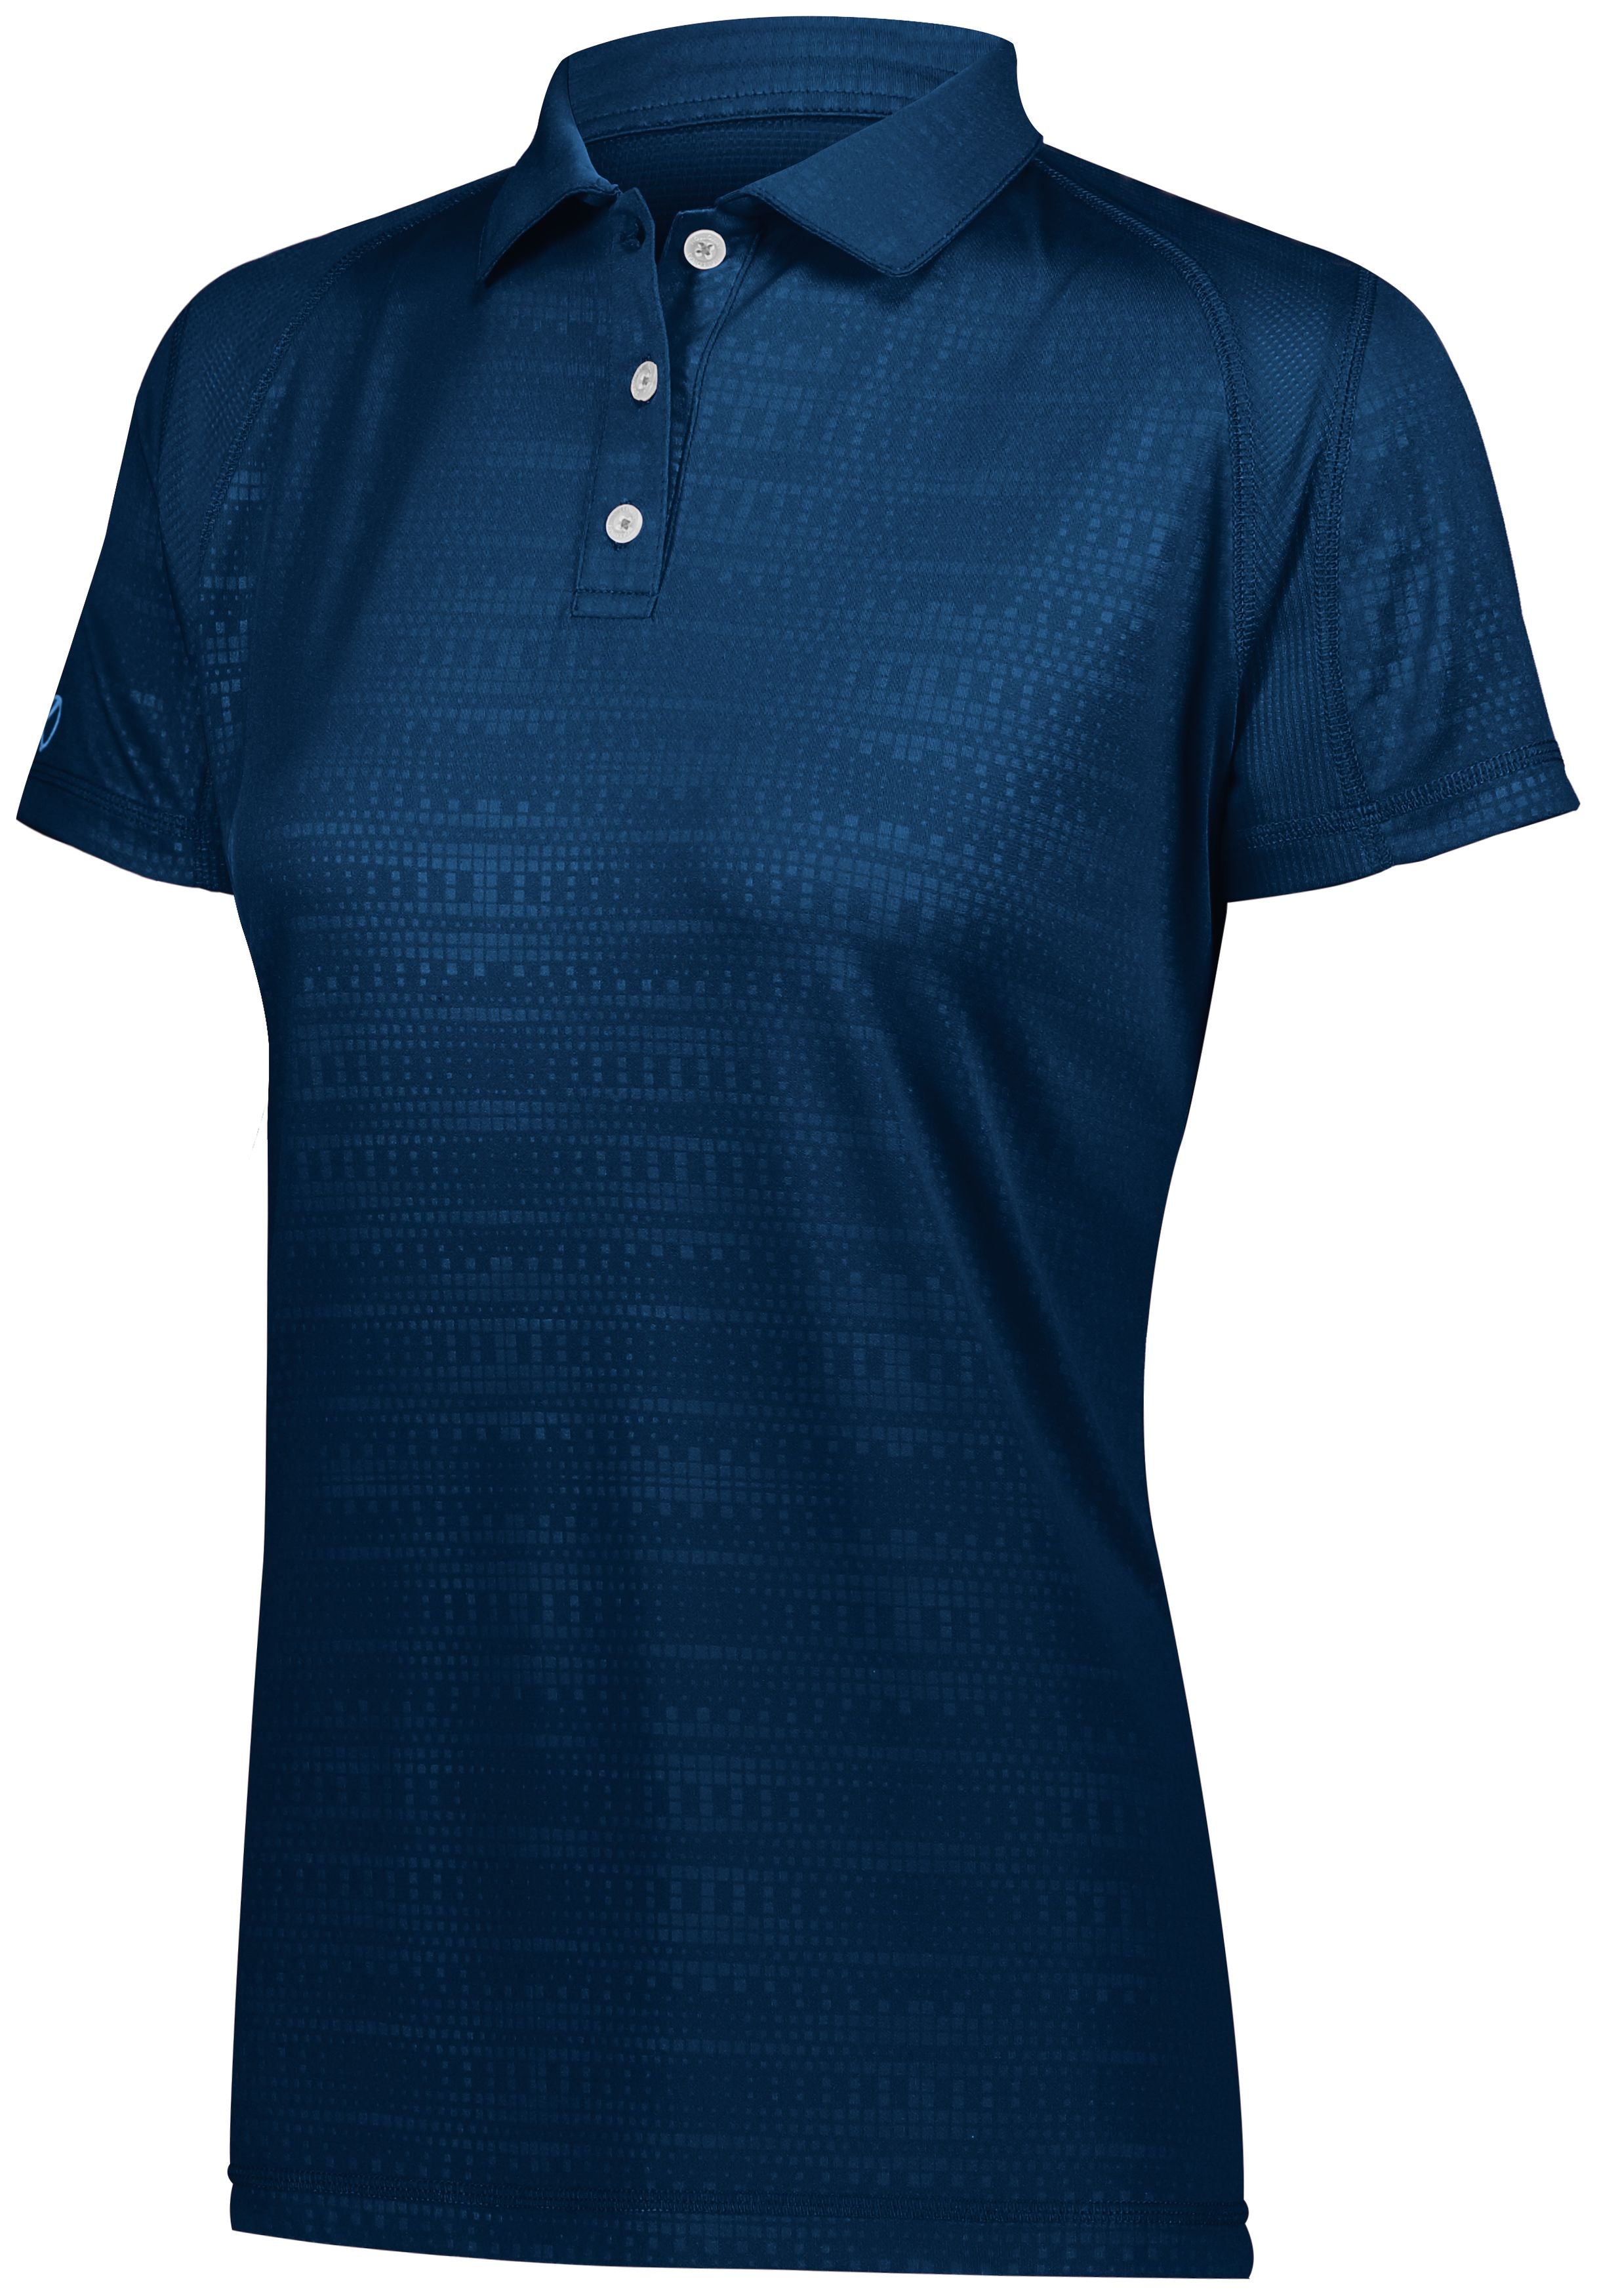 Holloway Ladies Converge Polo in Navy  -Part of the Ladies, Ladies-Polo, Polos, Holloway, Shirts, Converge-Collection product lines at KanaleyCreations.com